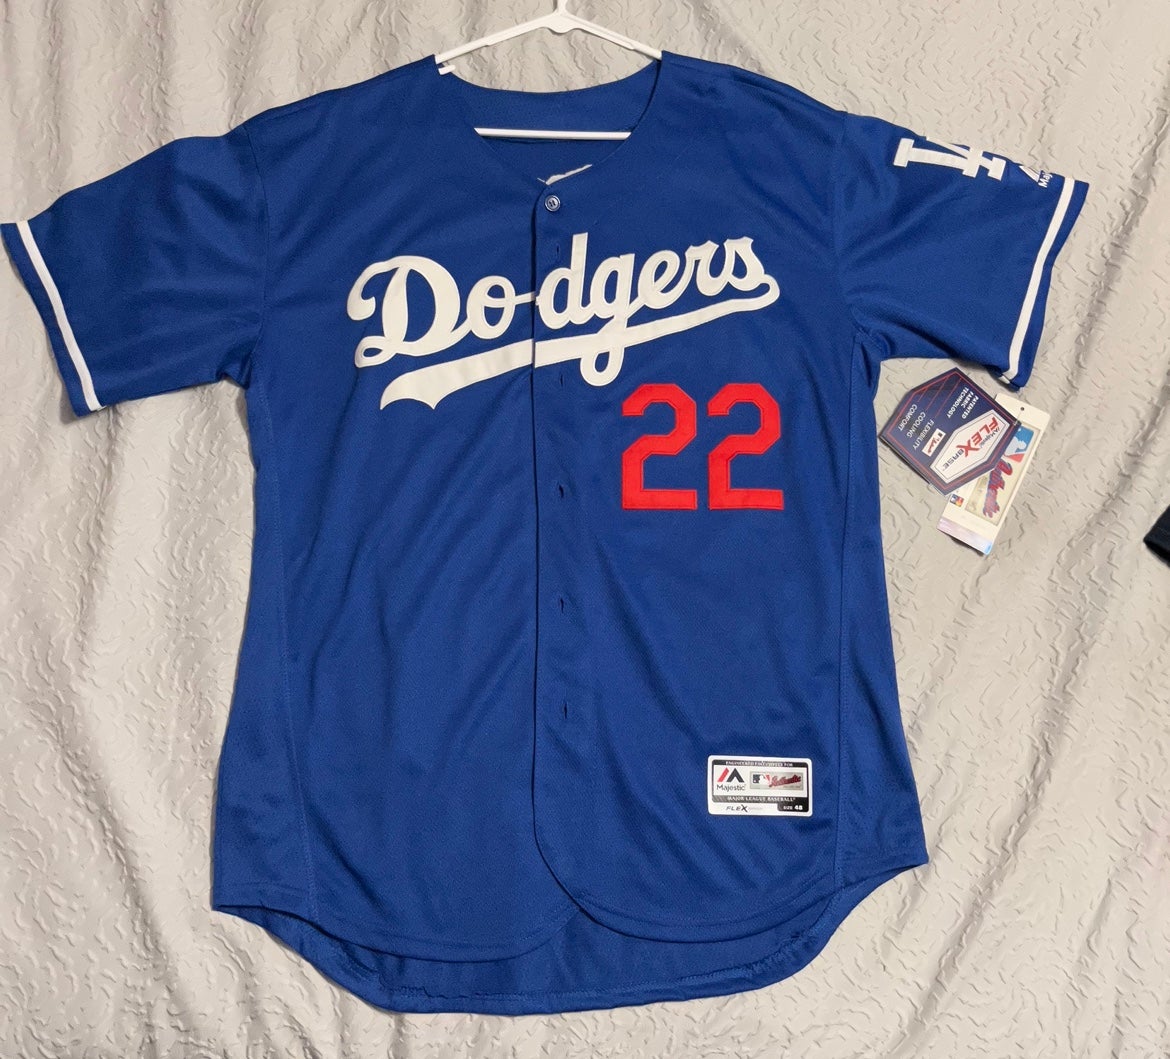 Men's Los Angeles Dodgers Majestic Gray Road Cool Base Jersey